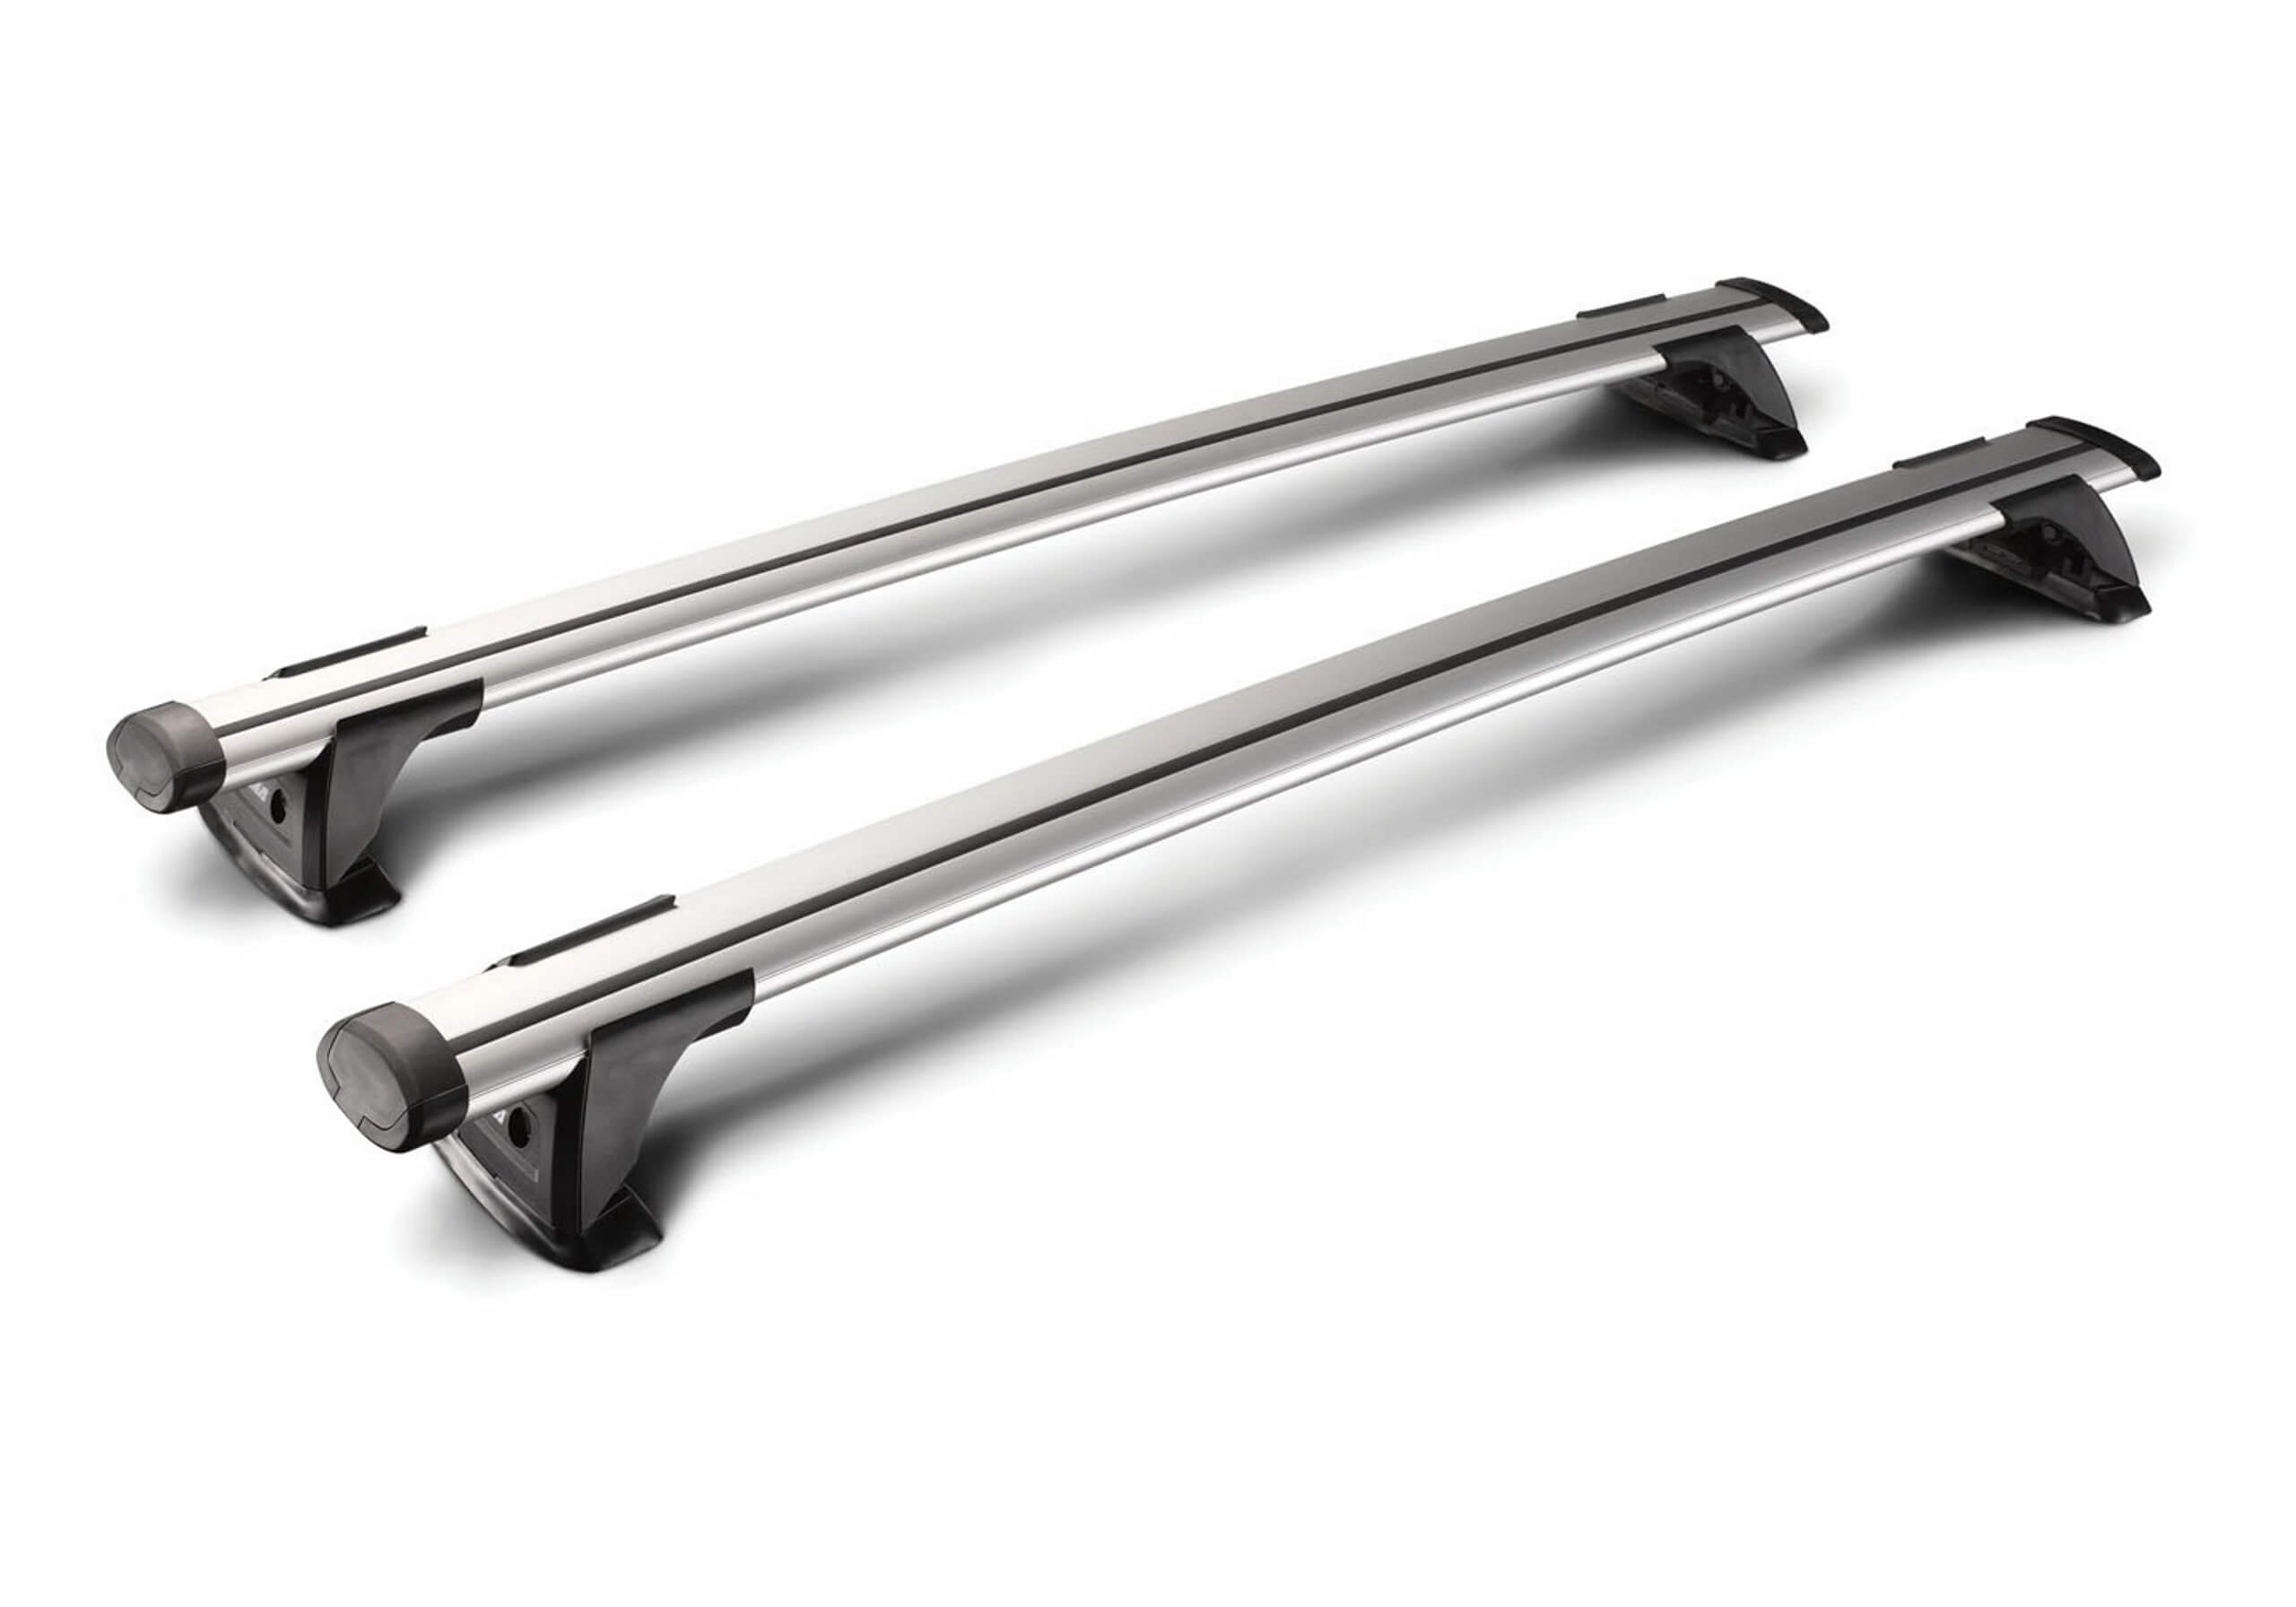 Saab 9-3 Sport Wagon (2005 to 2012):Yakima roof bars package - S16 silver bars with K328 kit